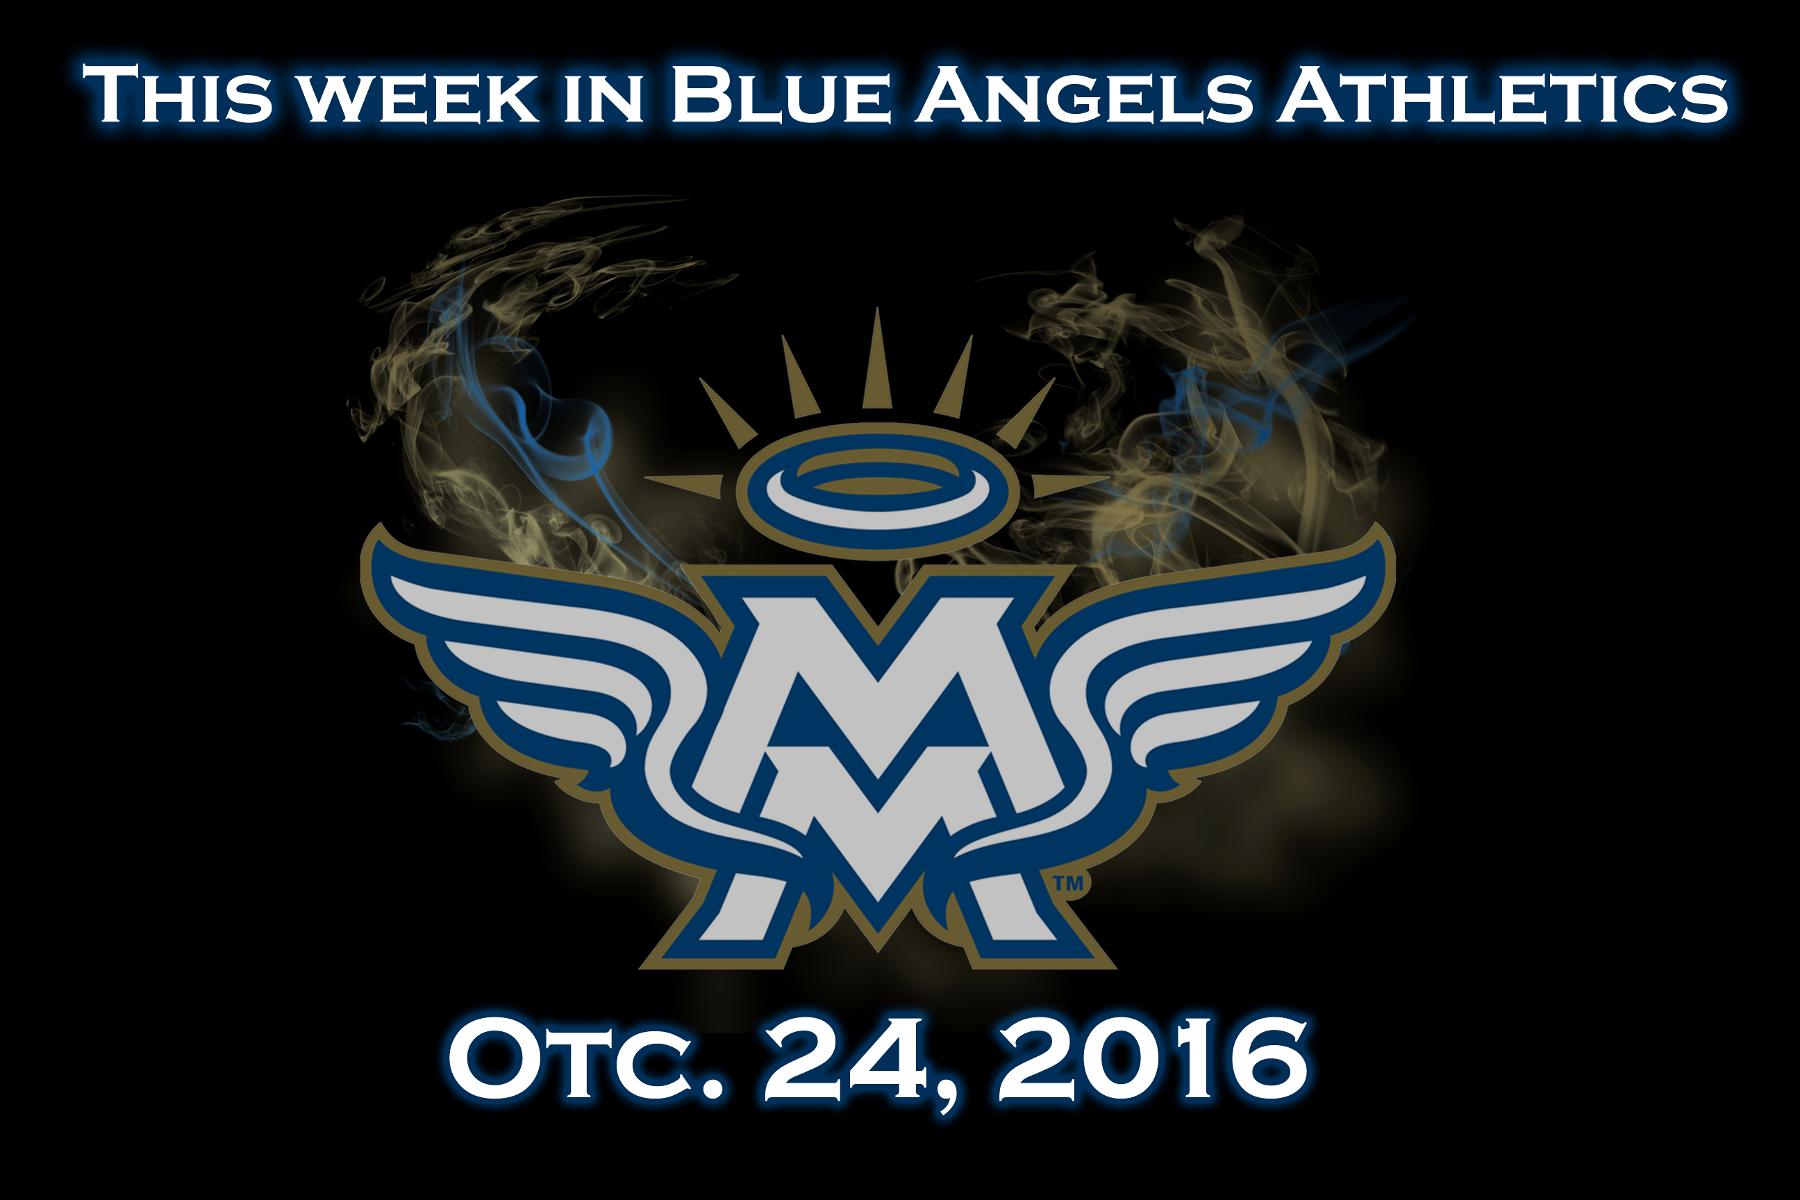 Blue Angels Weekly Preview 10-24-16